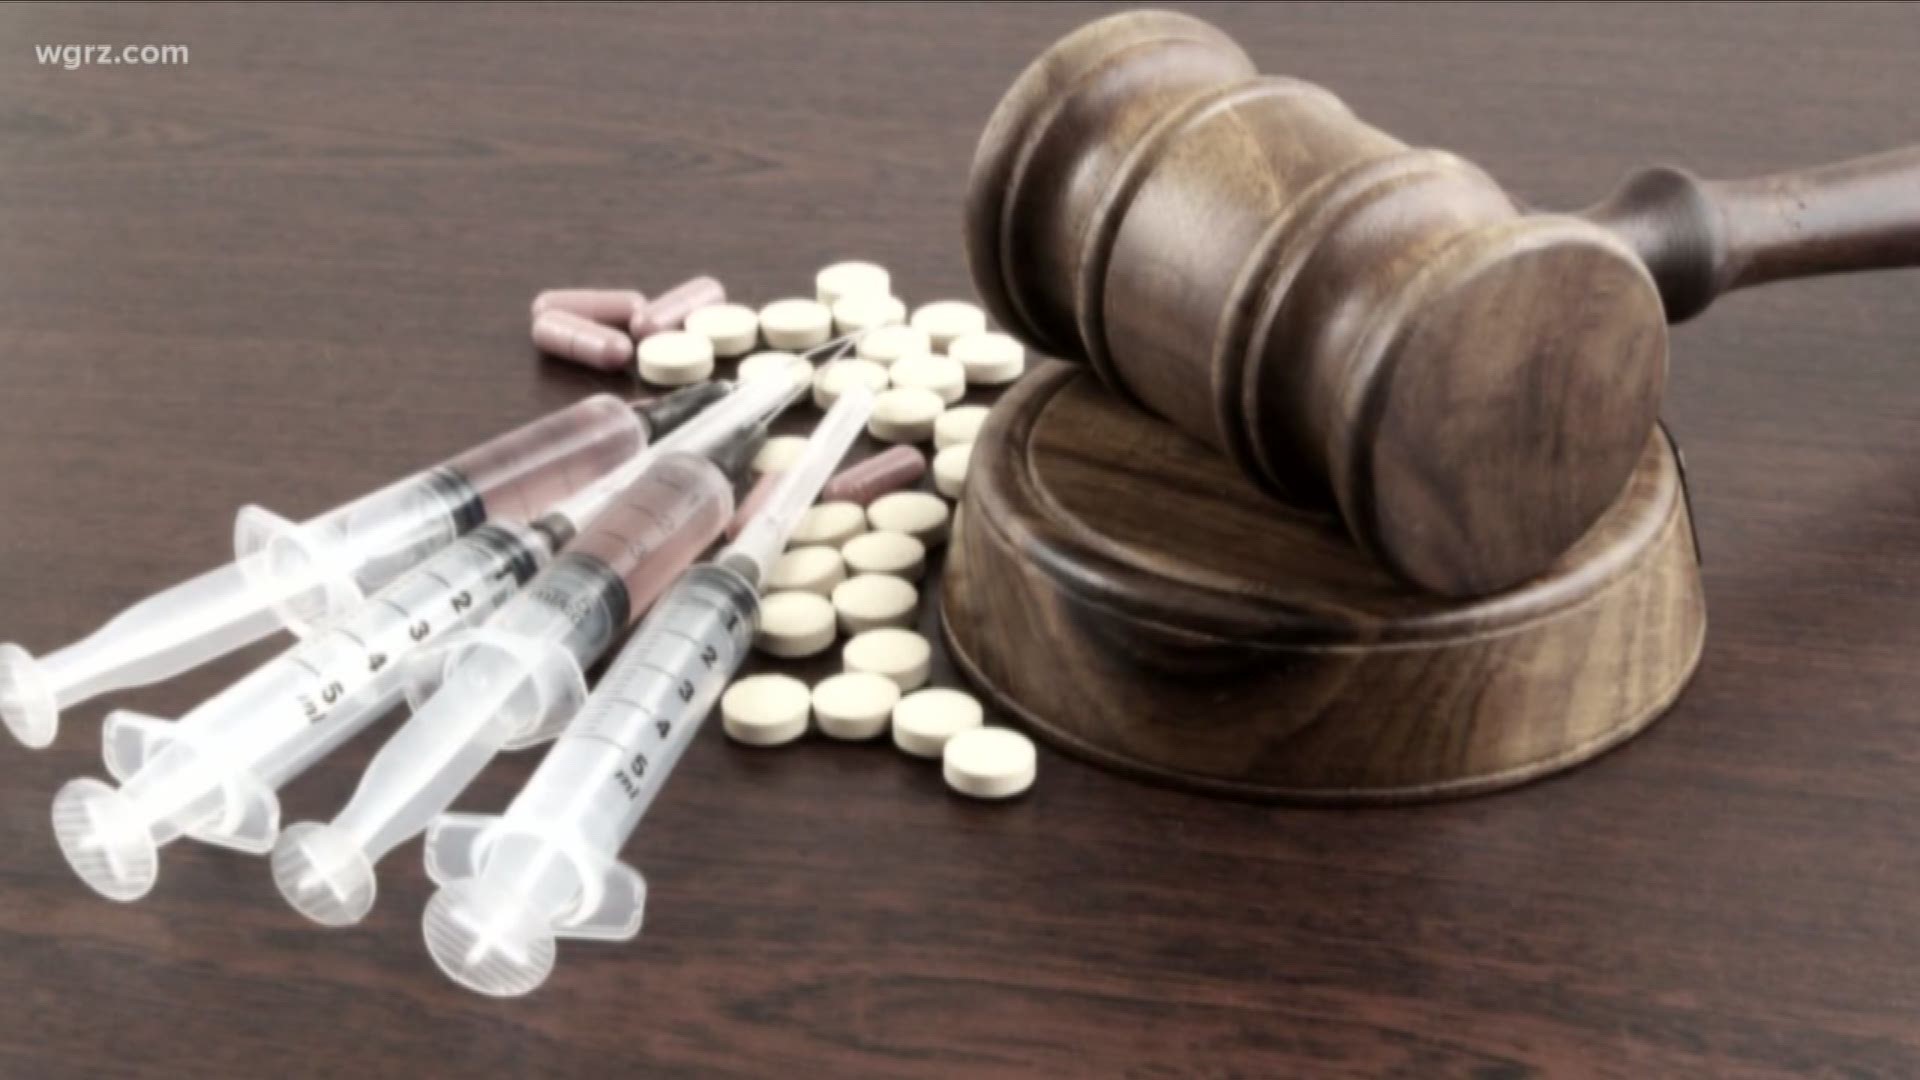 Opioid court may soon expand to the town of amherst.